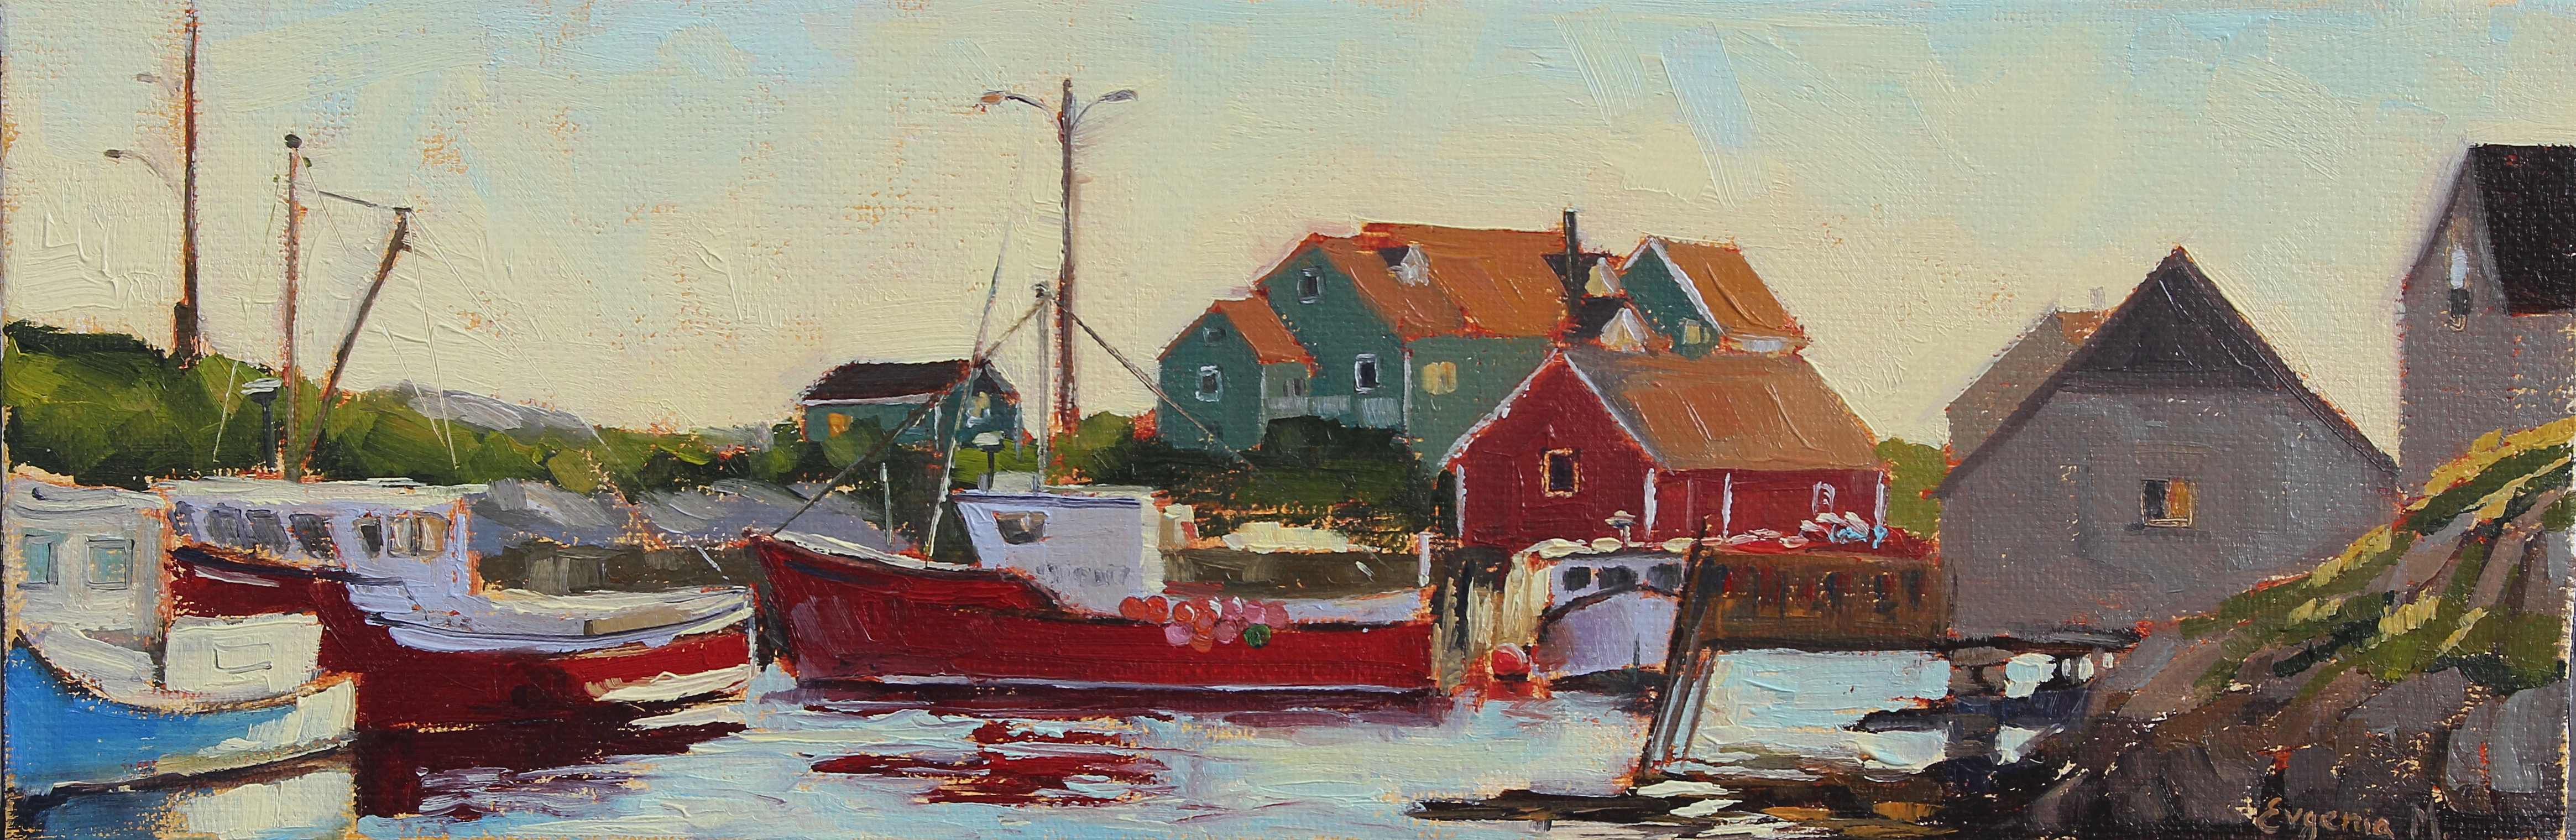 oil paintings of shacks and fishing boats in Peggy's cove Nova Scotia